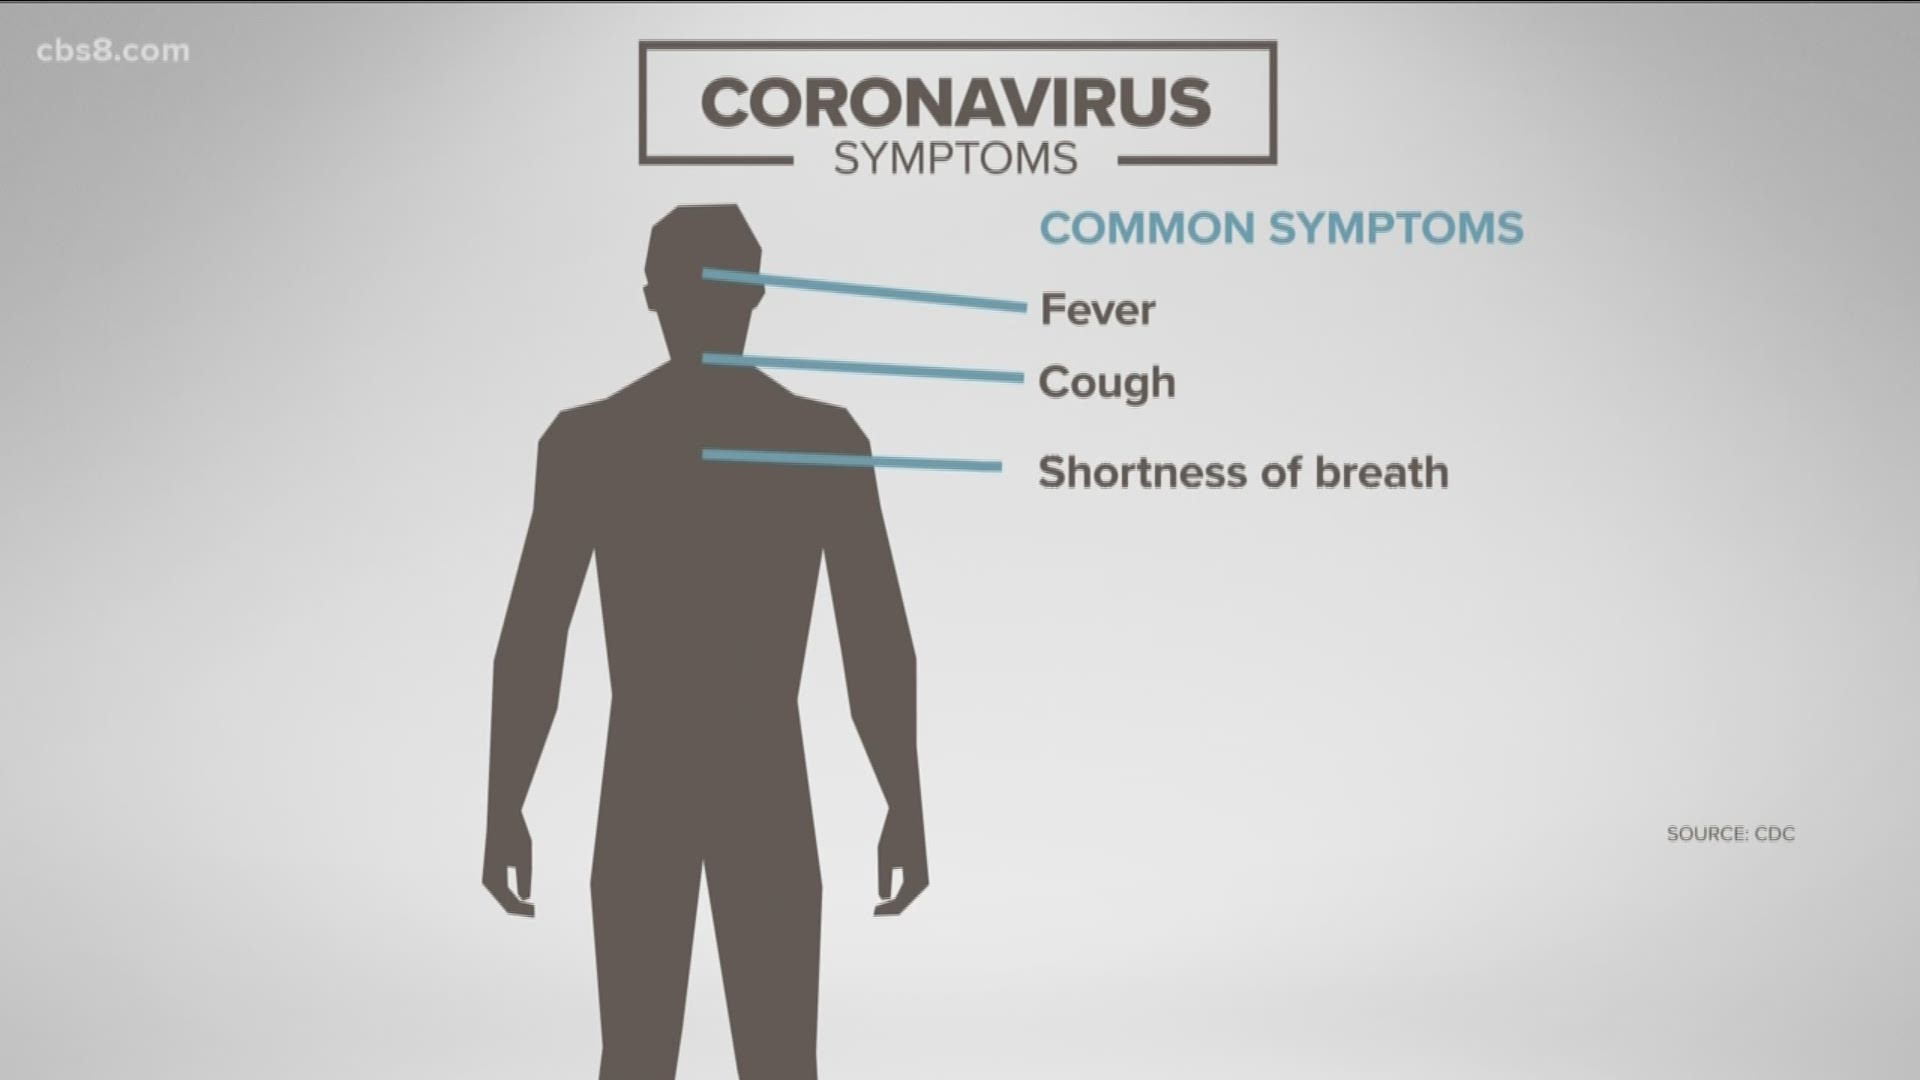 Get the facts: What are the symptoms? Why is it called COVID-19? Who is at risk?